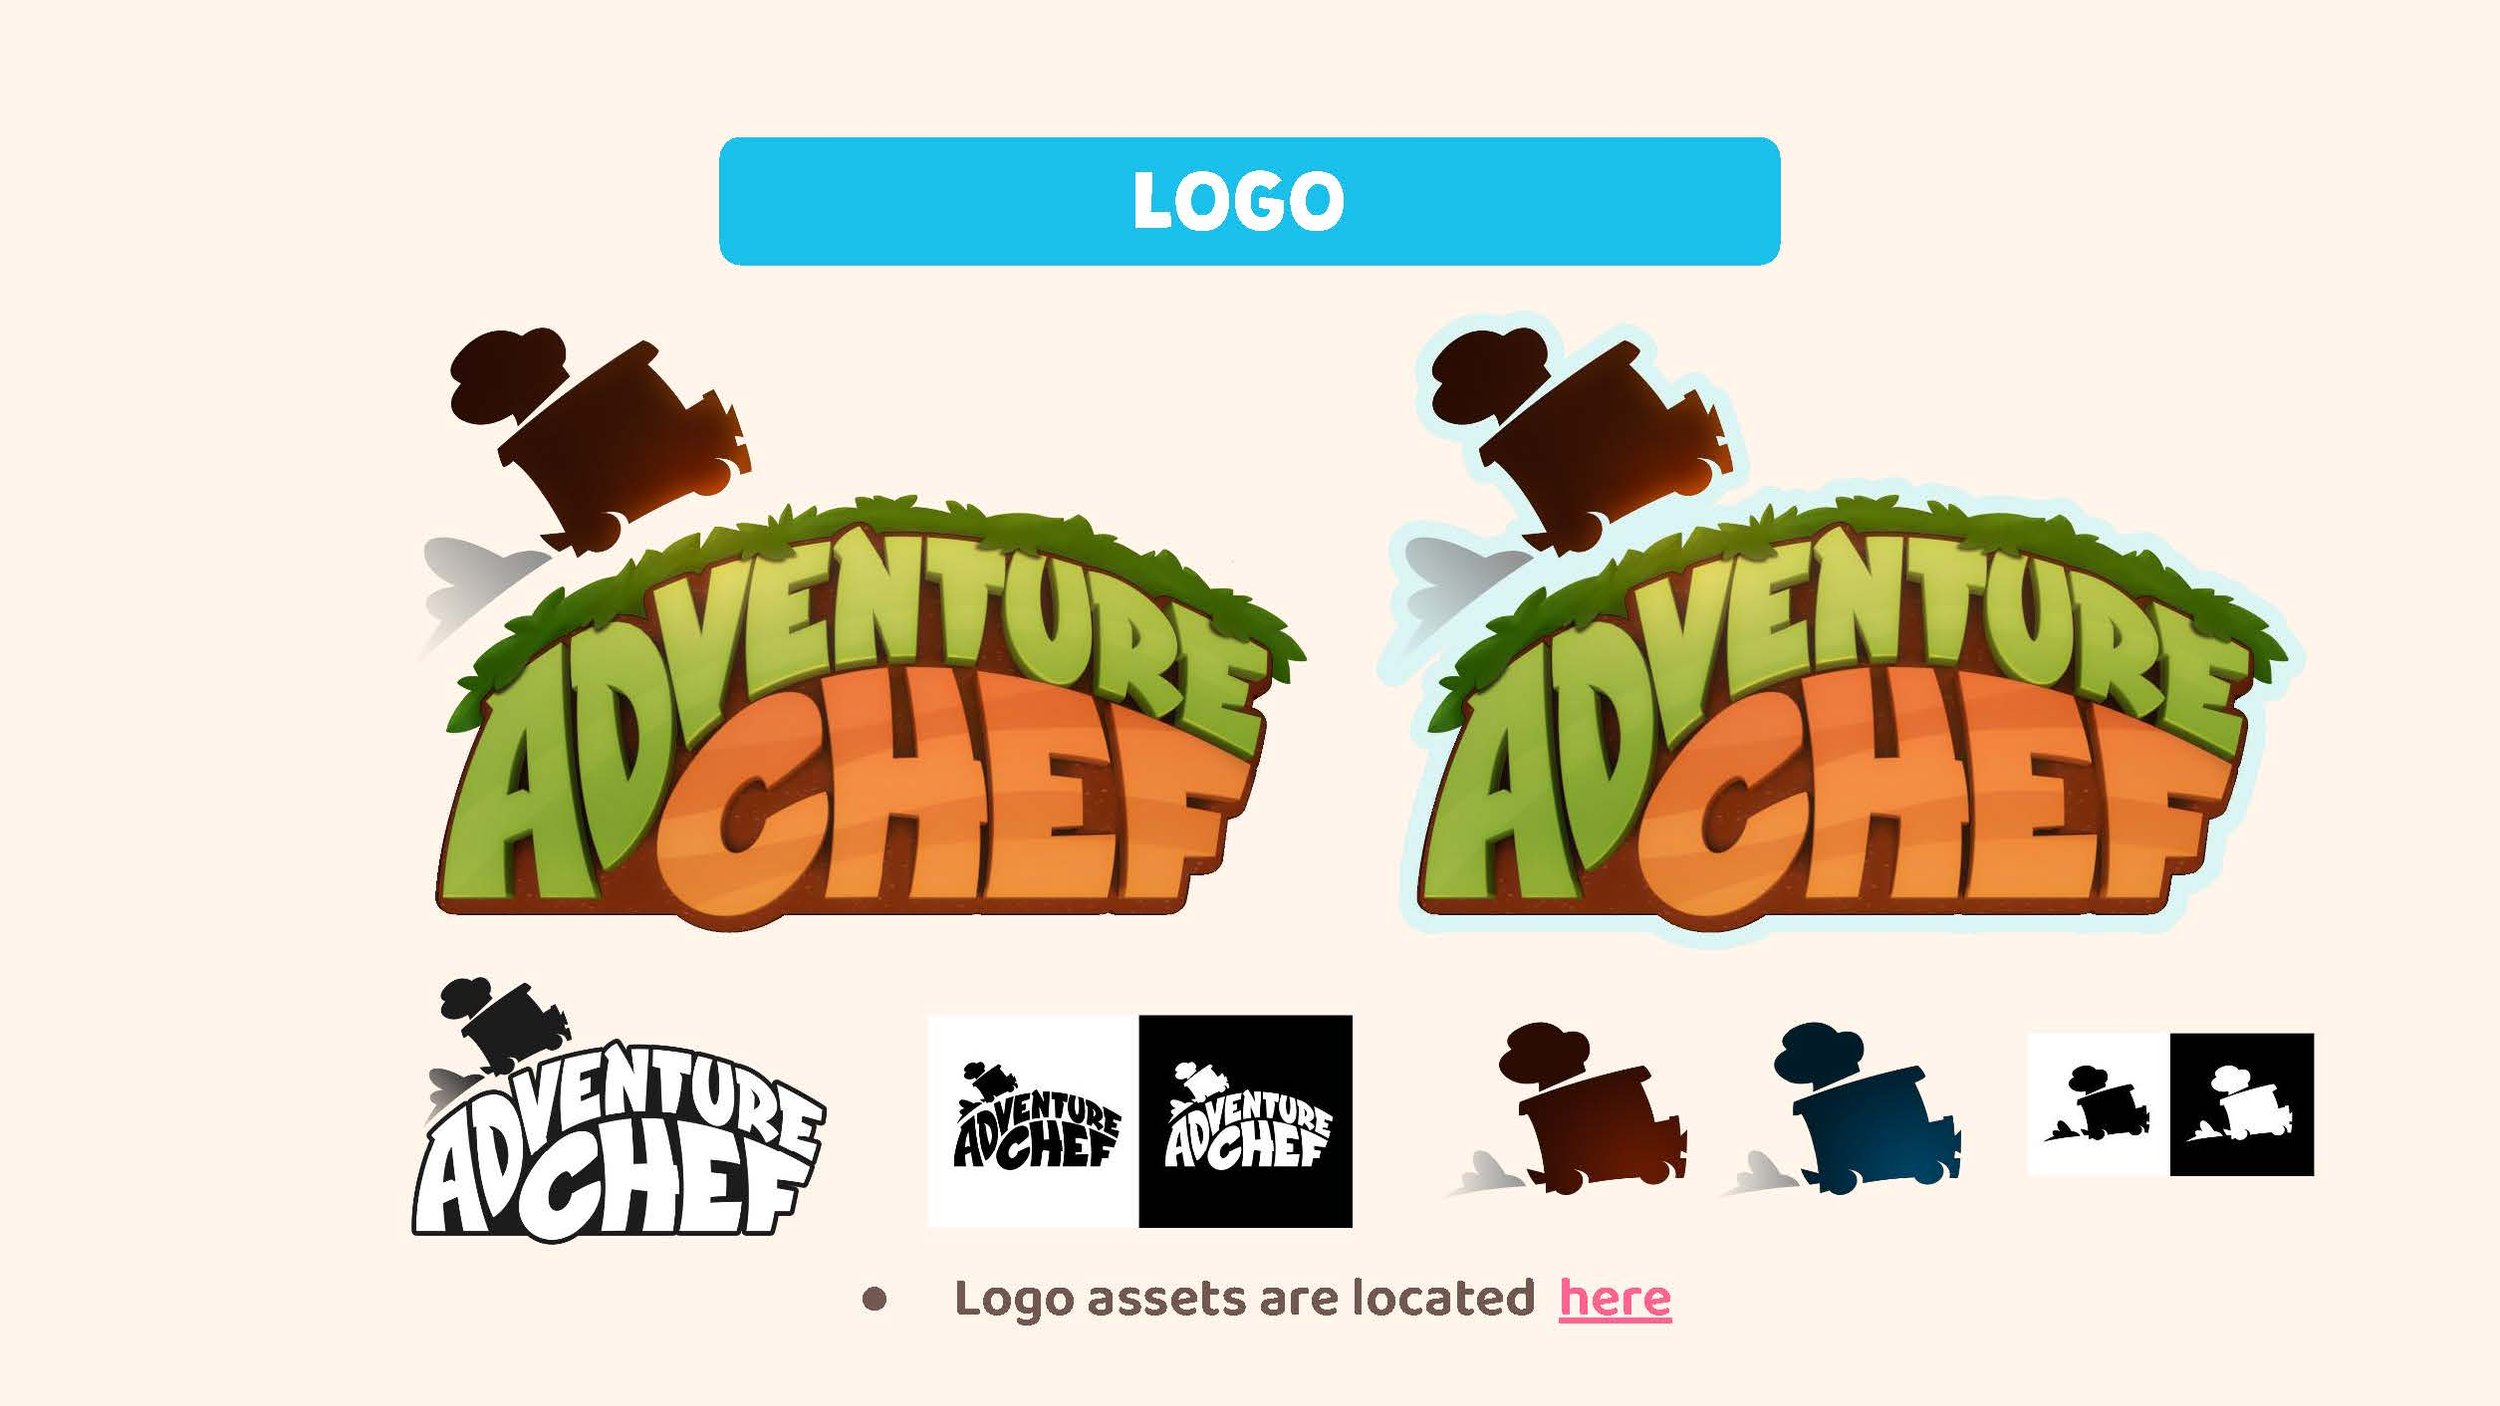 Adventure Chef_ Marketing Style guide 2022_Page_17.jpg